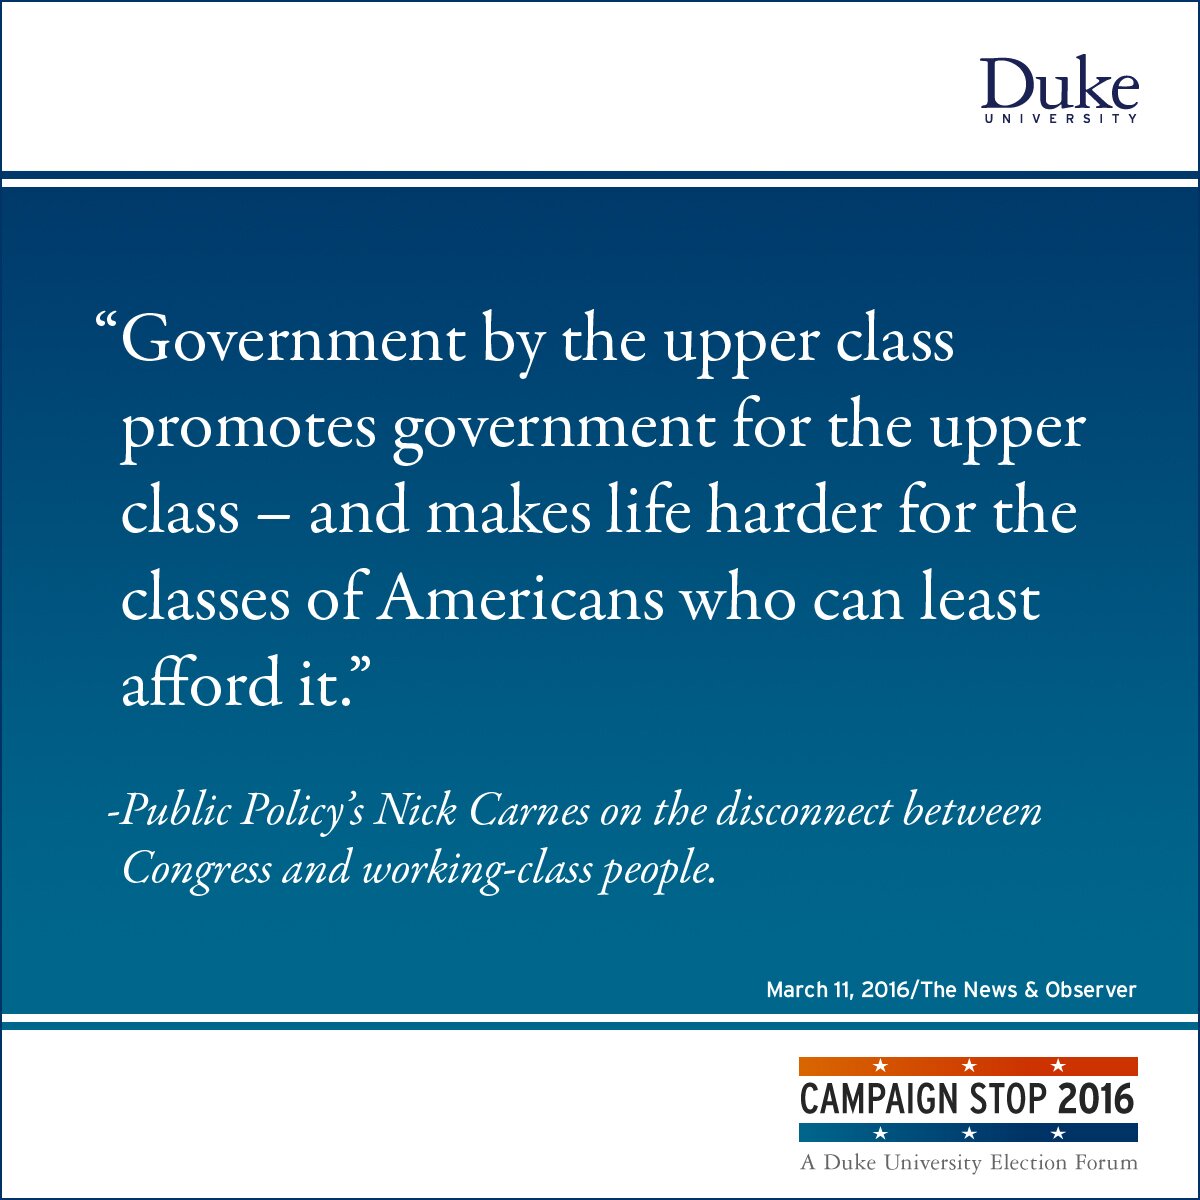 “Government by the upper class promotes government for the upper class – and makes life harder for the classes of Americans who can least afford it.” -Public Policy’s Nick Carnes on the disconnect between Congress and working-class people.